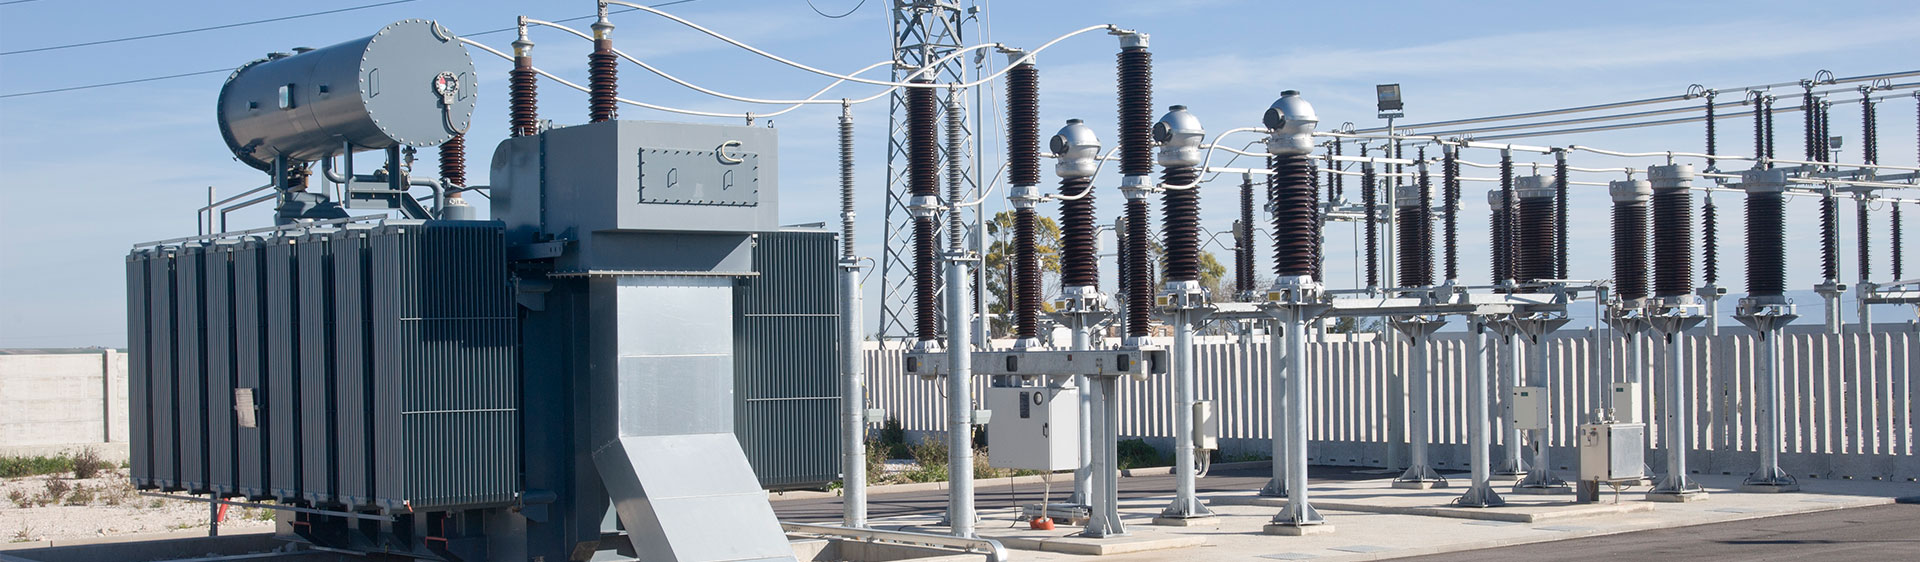 Metairie Electrical Testing Services, Transformer Testing Services and Infrared Scanning Services